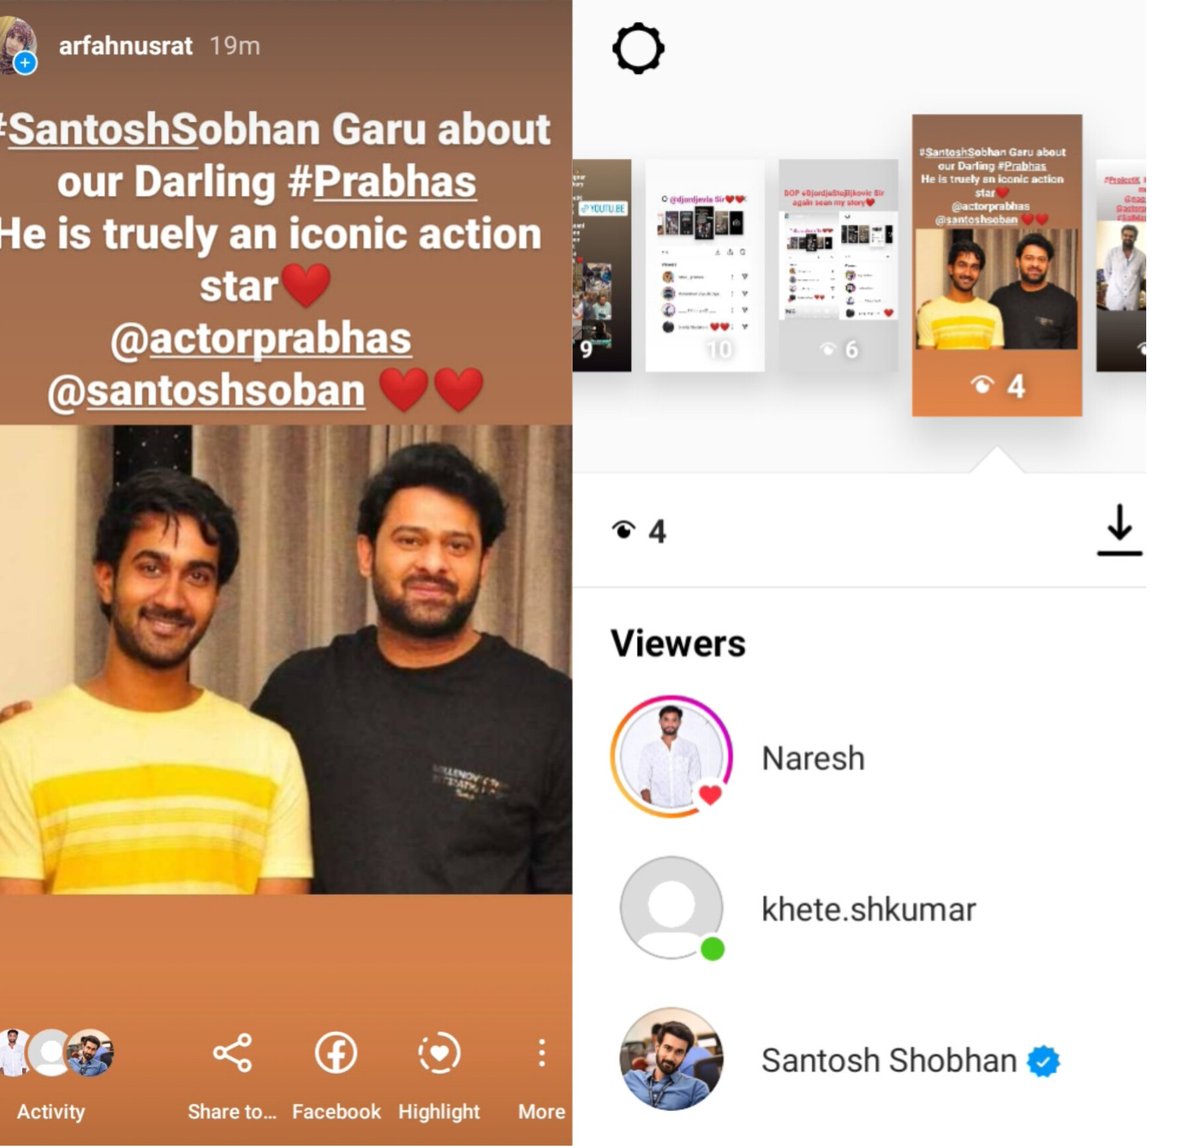 Thanks @santoshsoban Garu for see my Insta story❤

#SantoshSobhan Garu about our Darling #Prabhas

He is truely an iconic action star❤